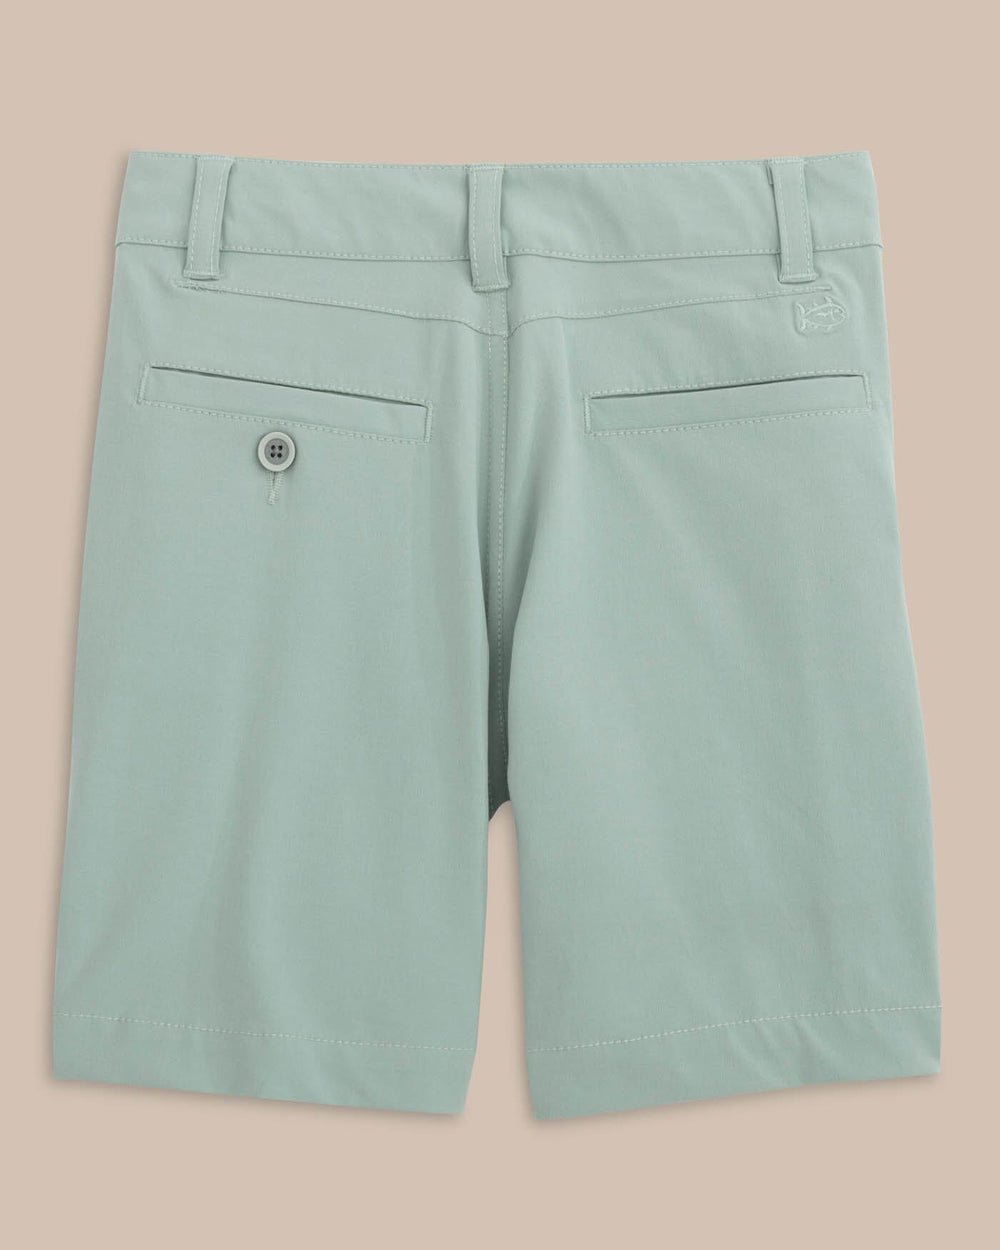 The back view of the Southern Tide Boys T3 Gulf Short by Southern Tide - Green Surf